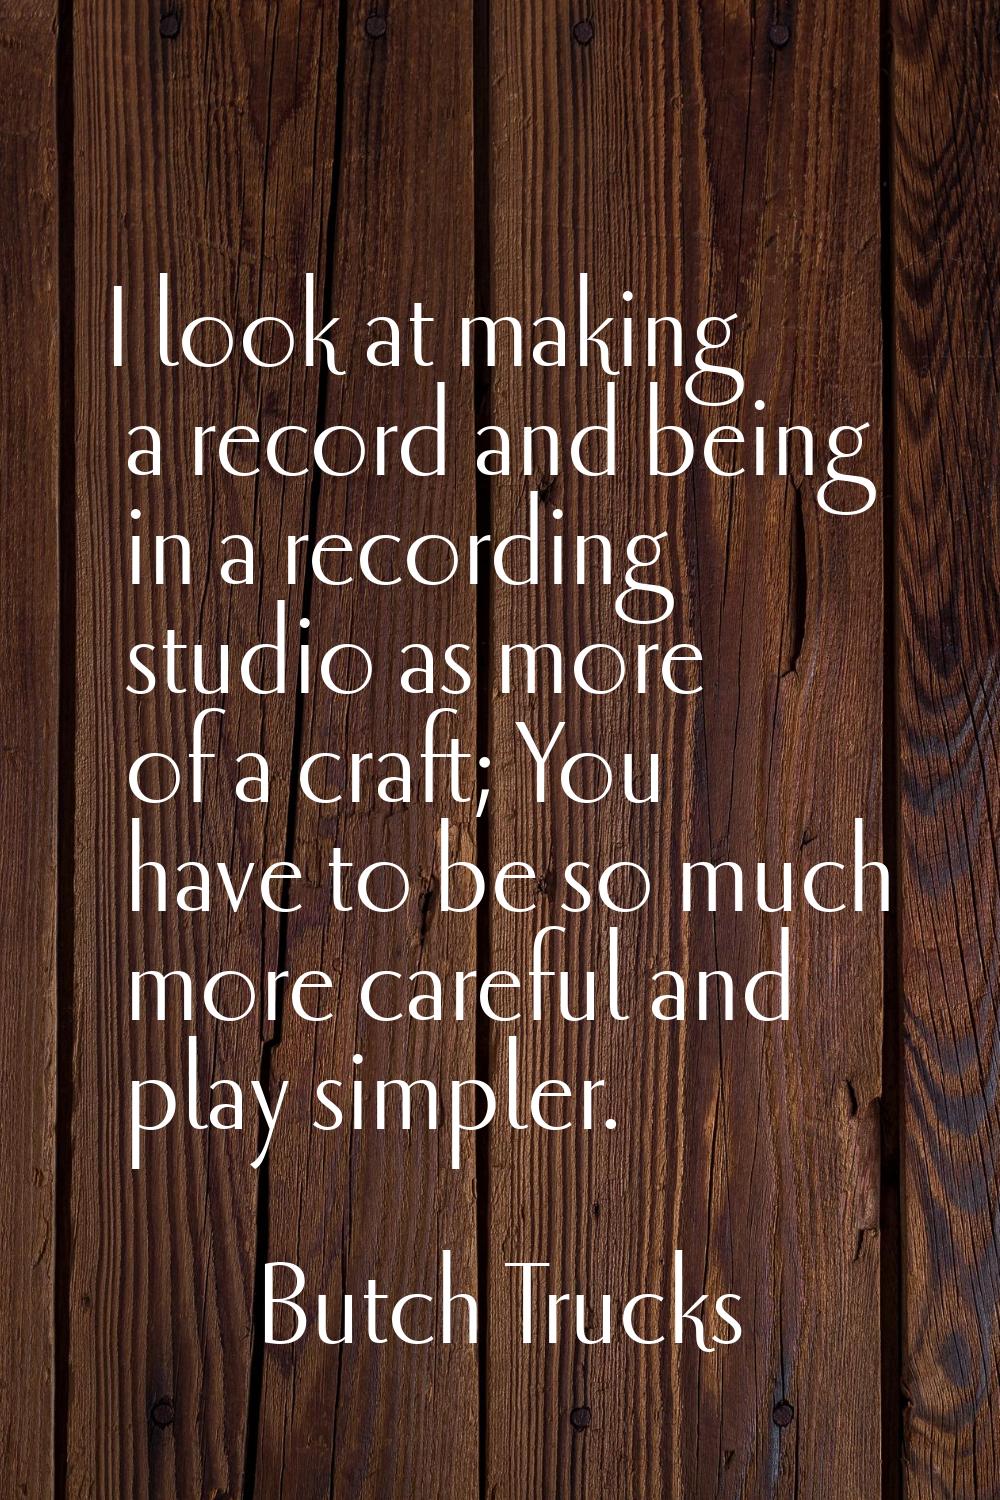 I look at making a record and being in a recording studio as more of a craft; You have to be so muc